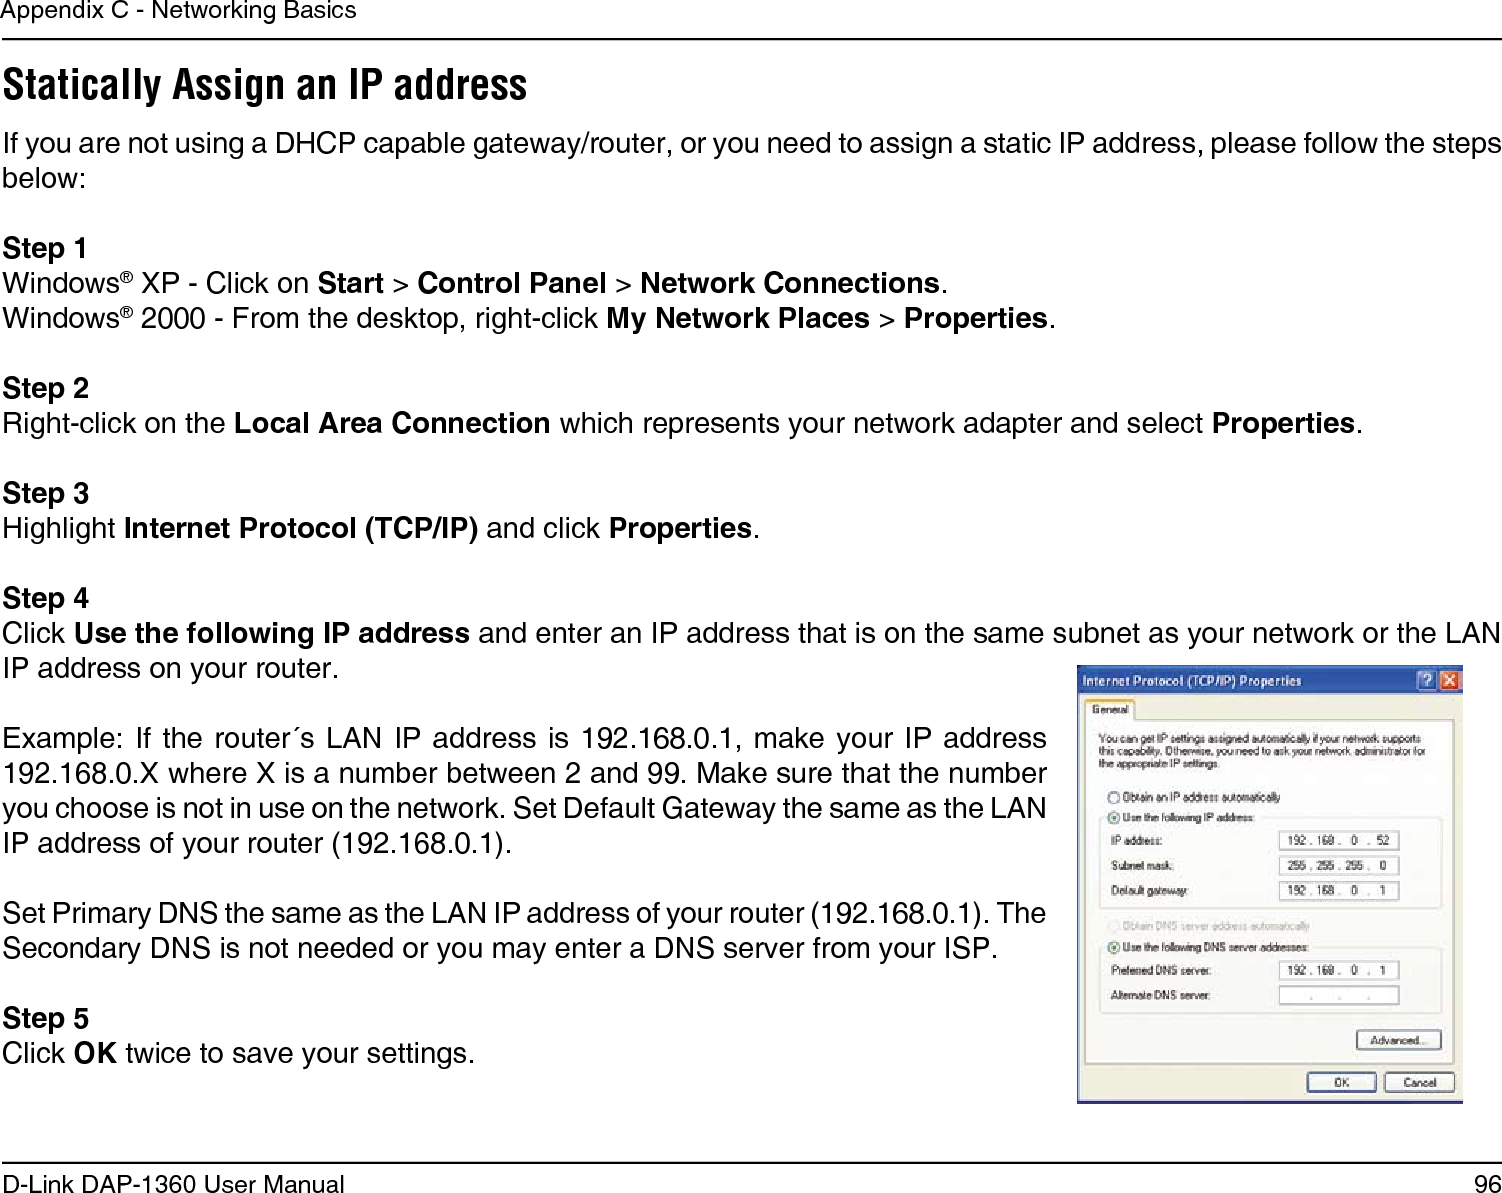 96D-Link DAP-1360 User ManualAppendix C - Networking BasicsStatically Assign an IP addressIf you are not using a DHCP capable gateway/router, or you need to assign a static IP address, please follow the steps below:Step 1Windows® XP - Click on Start &gt; Control Panel &gt; Network Connections.Windows® 2000 - From the desktop, right-click My Network Places &gt; Properties.Step 2Right-click on the Local Area Connection which represents your network adapter and select Properties.Step 3Highlight Internet Protocol (TCP/IP) and click Properties.Step 4Click Use the following IP address and enter an IP address that is on the same subnet as your network or the LAN IP address on your router. Example: If  the router´s  LAN IP  address is 192.168.0.1, make your  IP address 192.168.0.X where X is a number between 2 and 99. Make sure that the number you choose is not in use on the network. Set Default Gateway the same as the LAN IP address of your router (192.168.0.1). Set Primary DNS the same as the LAN IP address of your router (192.168.0.1). The Secondary DNS is not needed or you may enter a DNS server from your ISP.Step 5Click OK twice to save your settings.